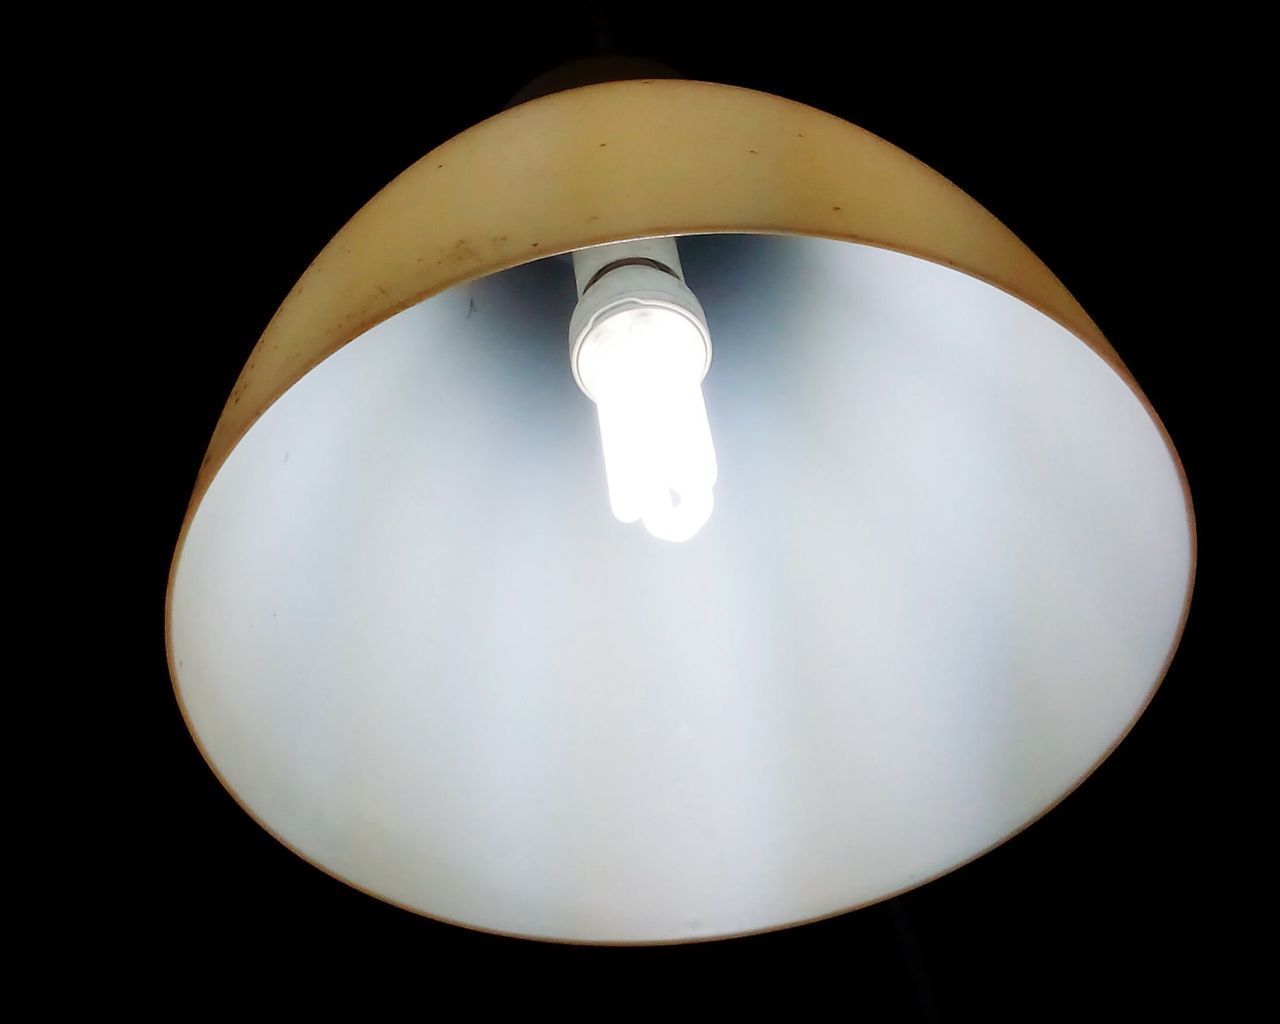 LOW ANGLE VIEW OF ILLUMINATED LAMP AGAINST BLACK BACKGROUND